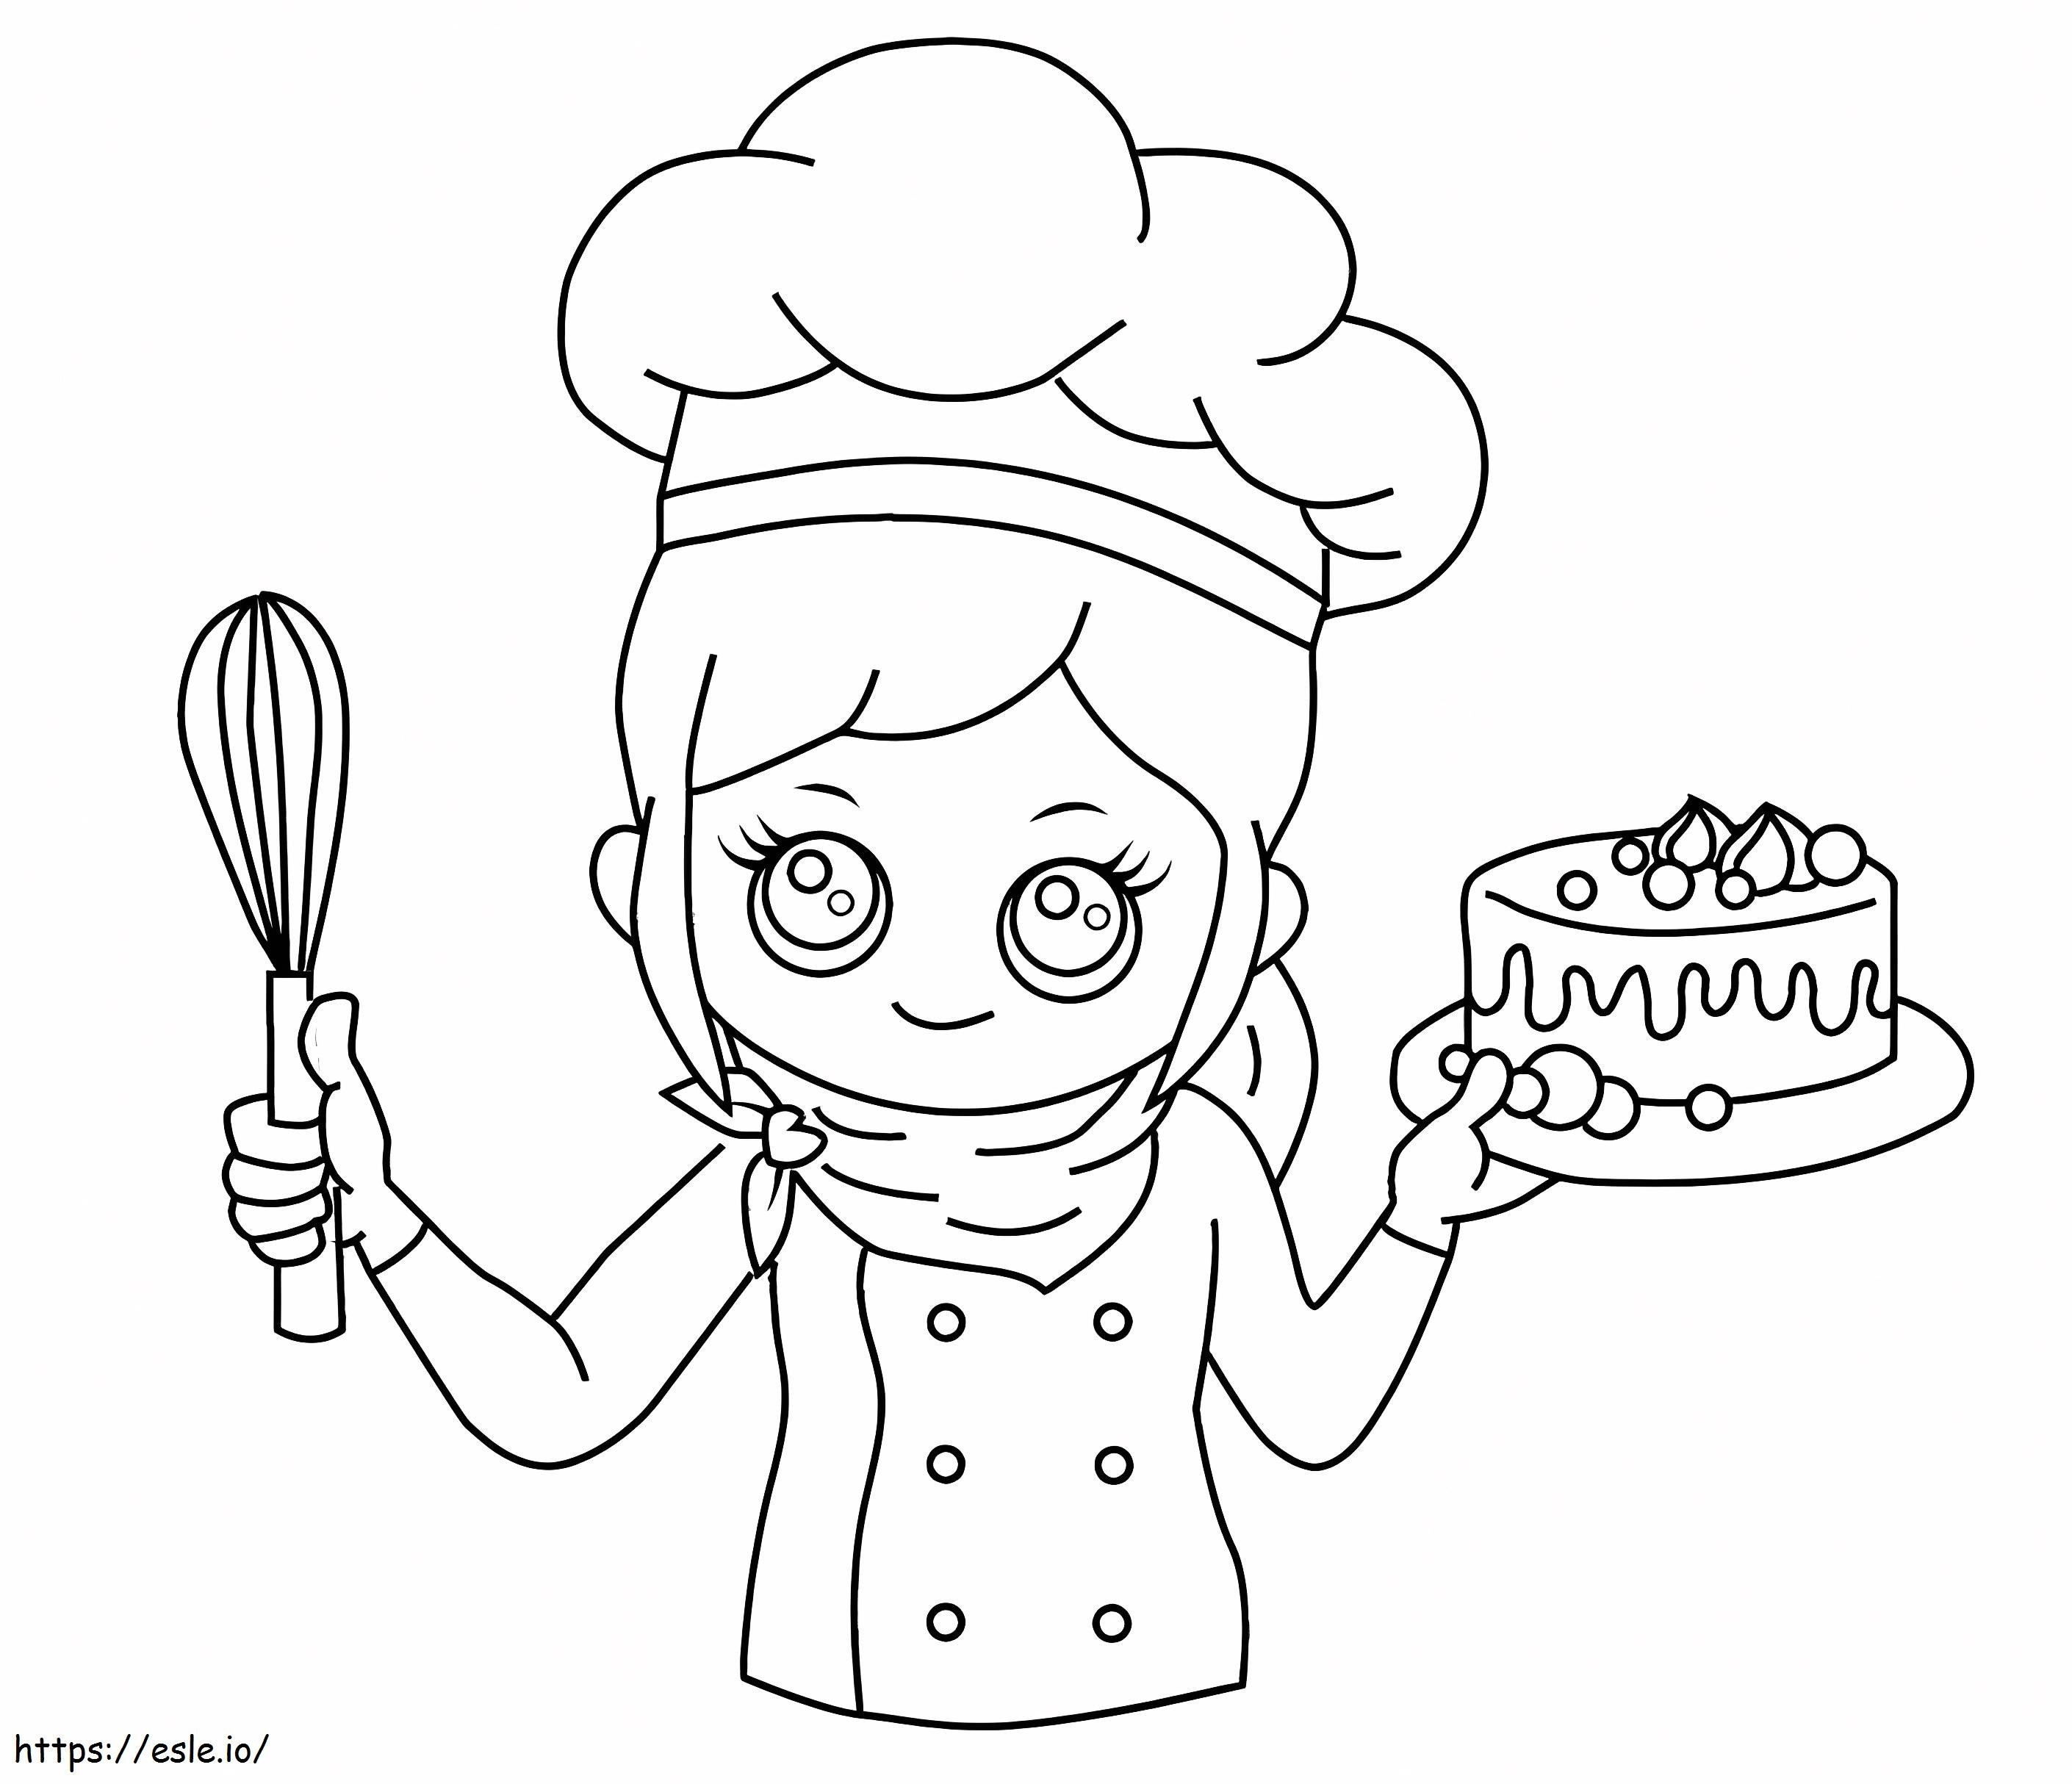 Chef With Cake coloring page